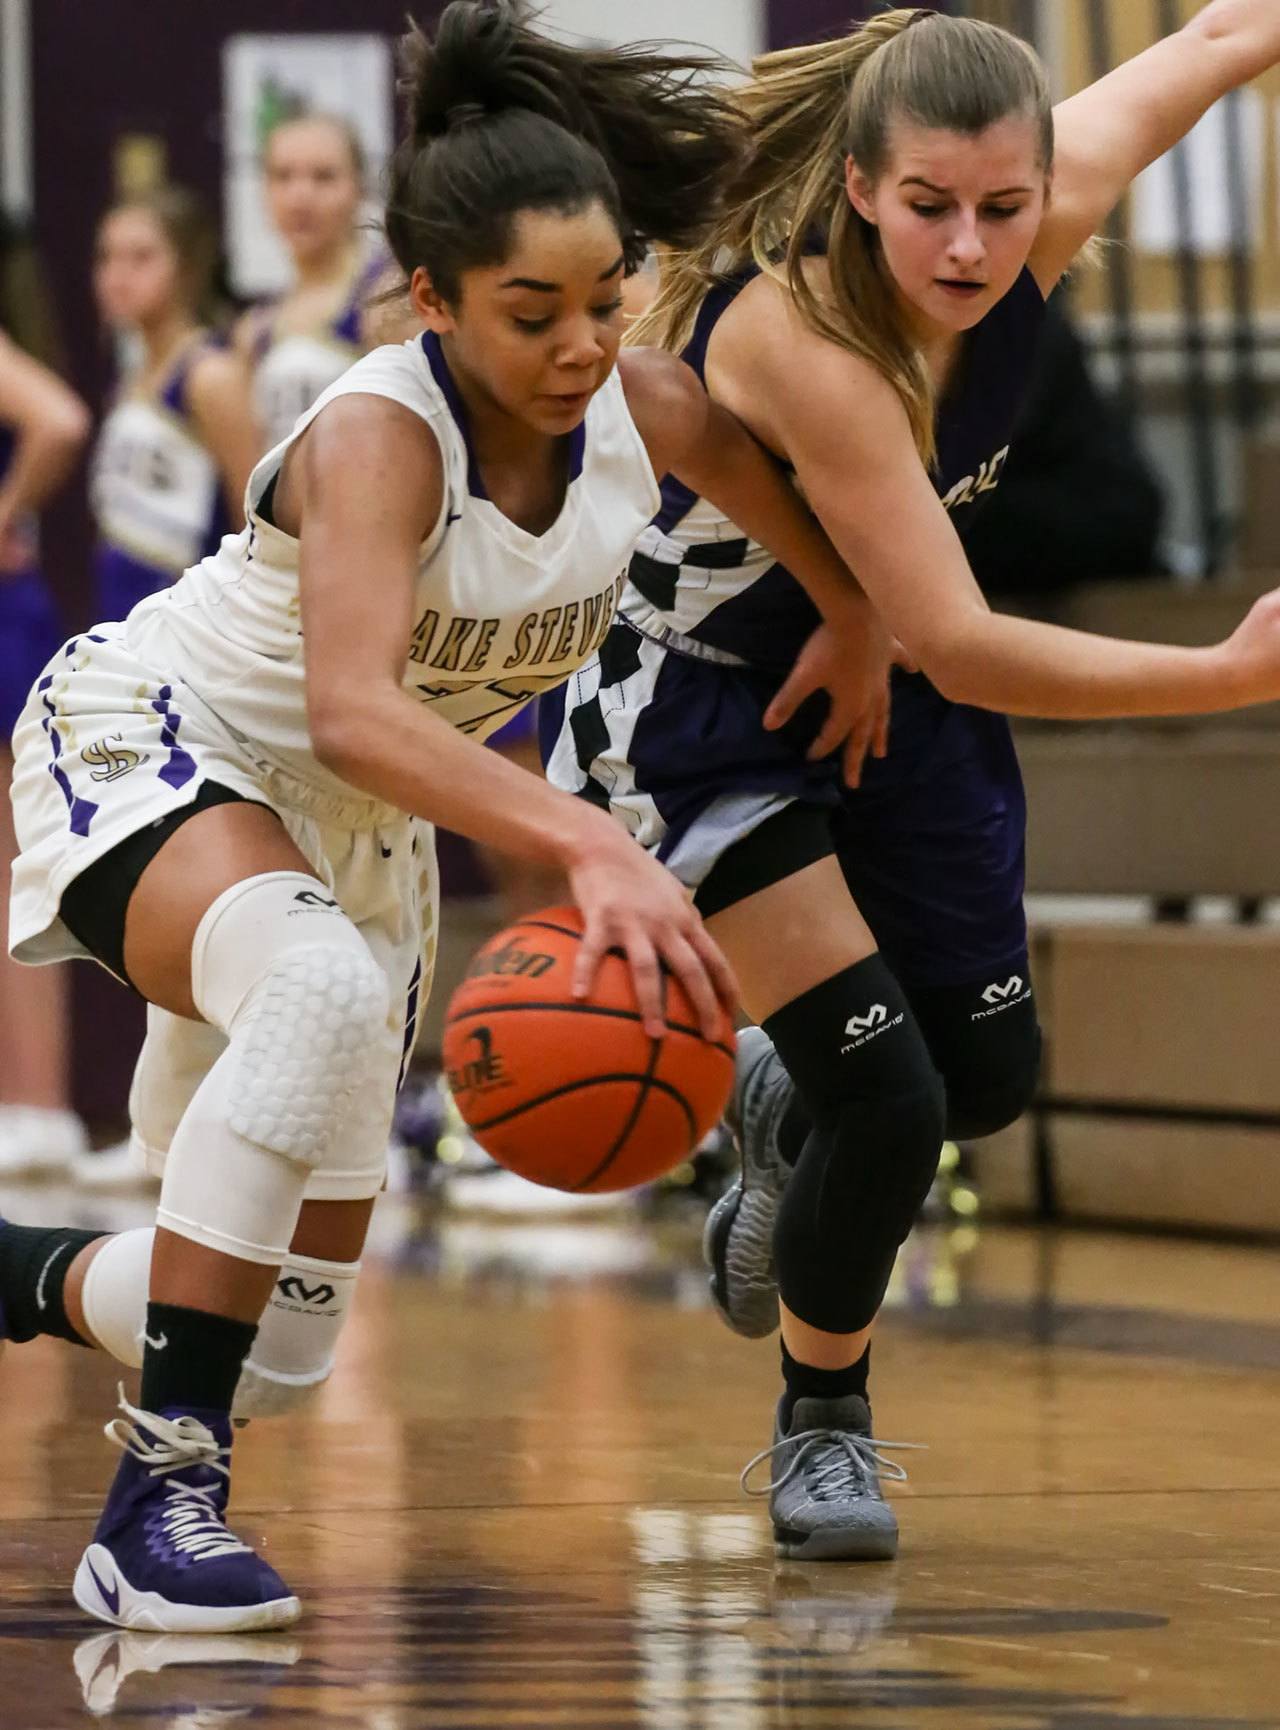 Lake Stevens’ Raigan Reed (left) and Kamiak’s Alex Gallaher vie for control of a loose ball Wednesday night in Lake Stevens. The Vikings won 65-61. (Kevin Clark / The Herald)